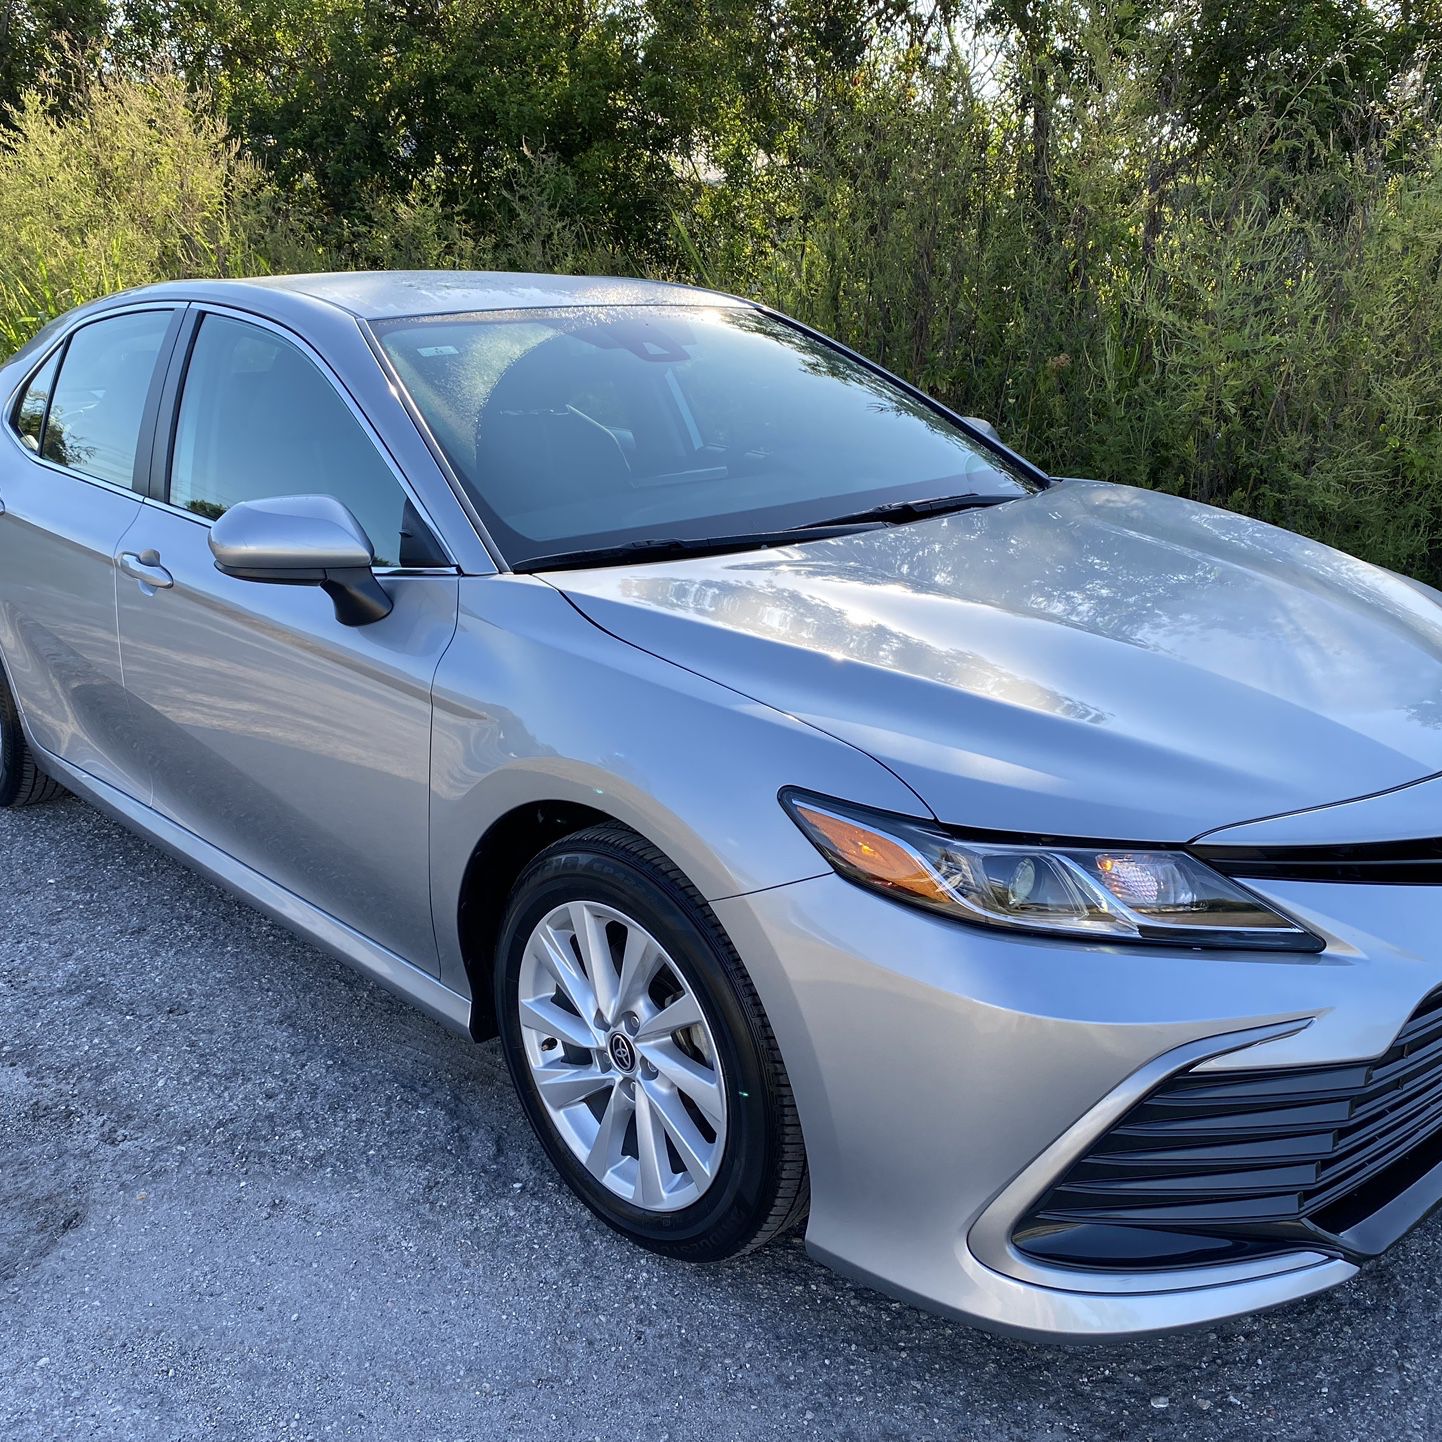 2021 TOYOTA CAMRY LE *LIKE NEW* ONLY 14,000 MILES *ONE OWNER CLEAN FL  *ONE OWNER  TOYOTA DEALER SERVICED  *ONLY 14,000 MILES  CAR IS FLAWLESS  FINANC